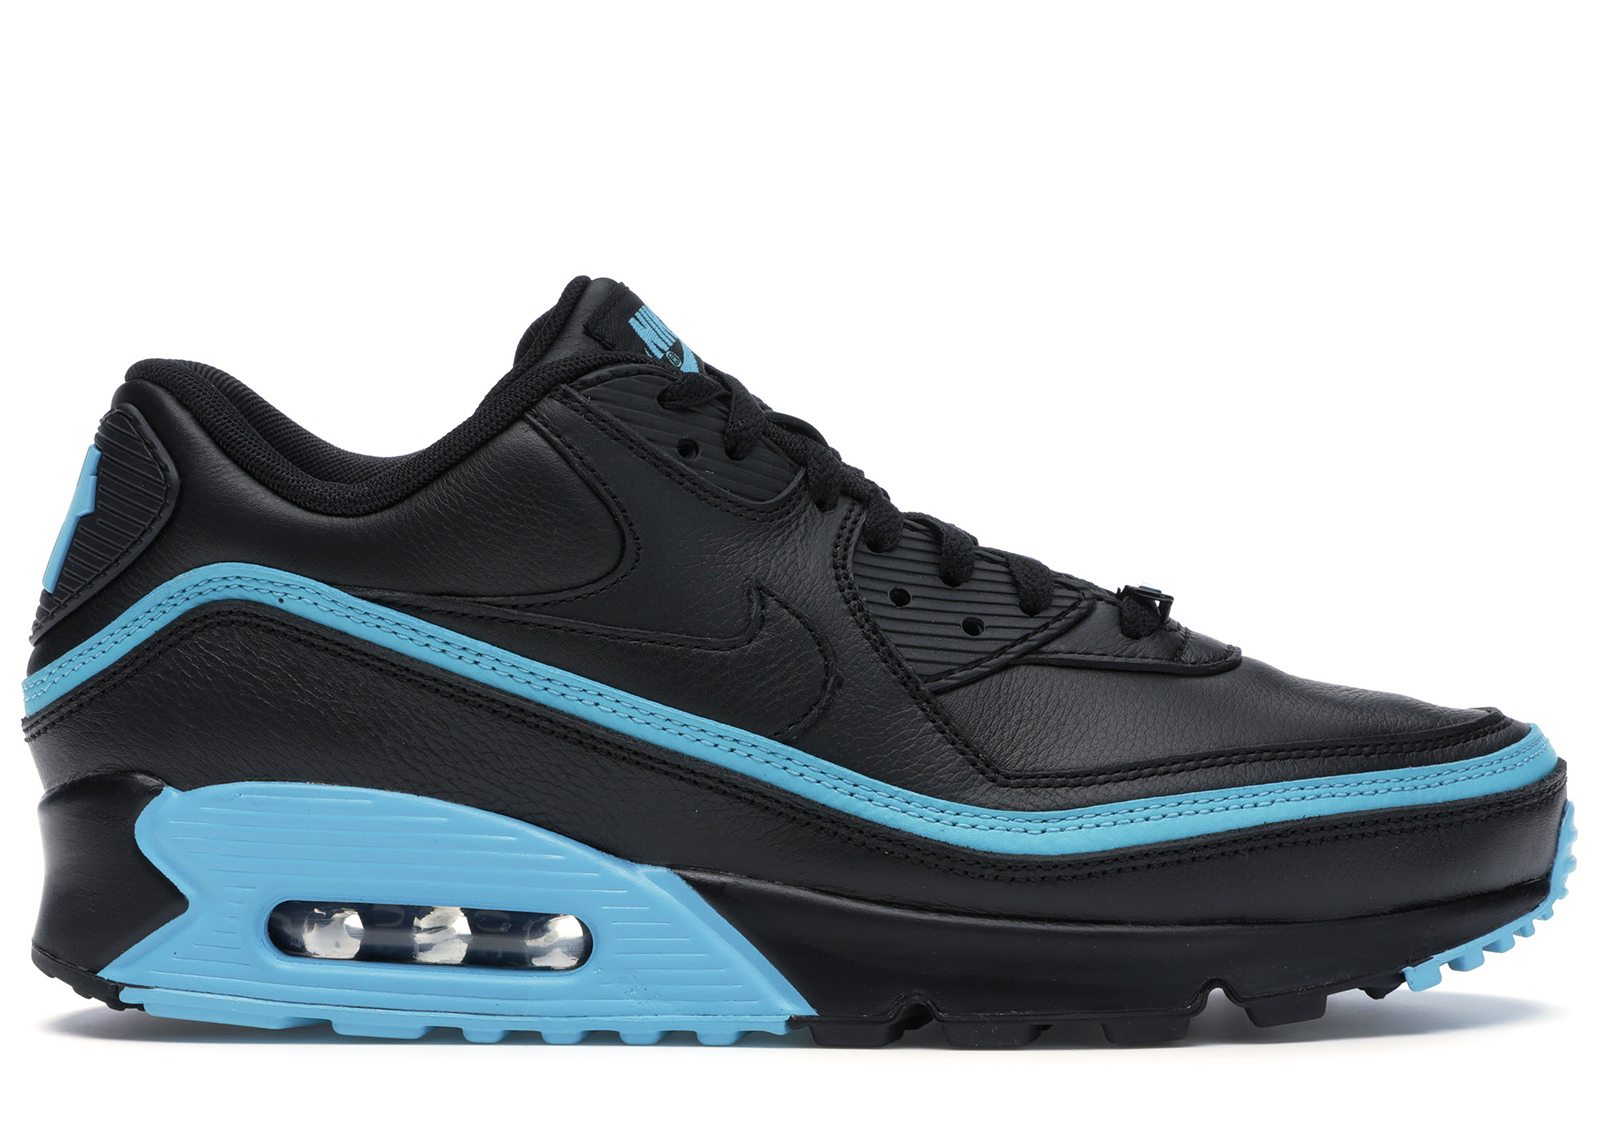 undefeated x nike air max 90 black blue fury